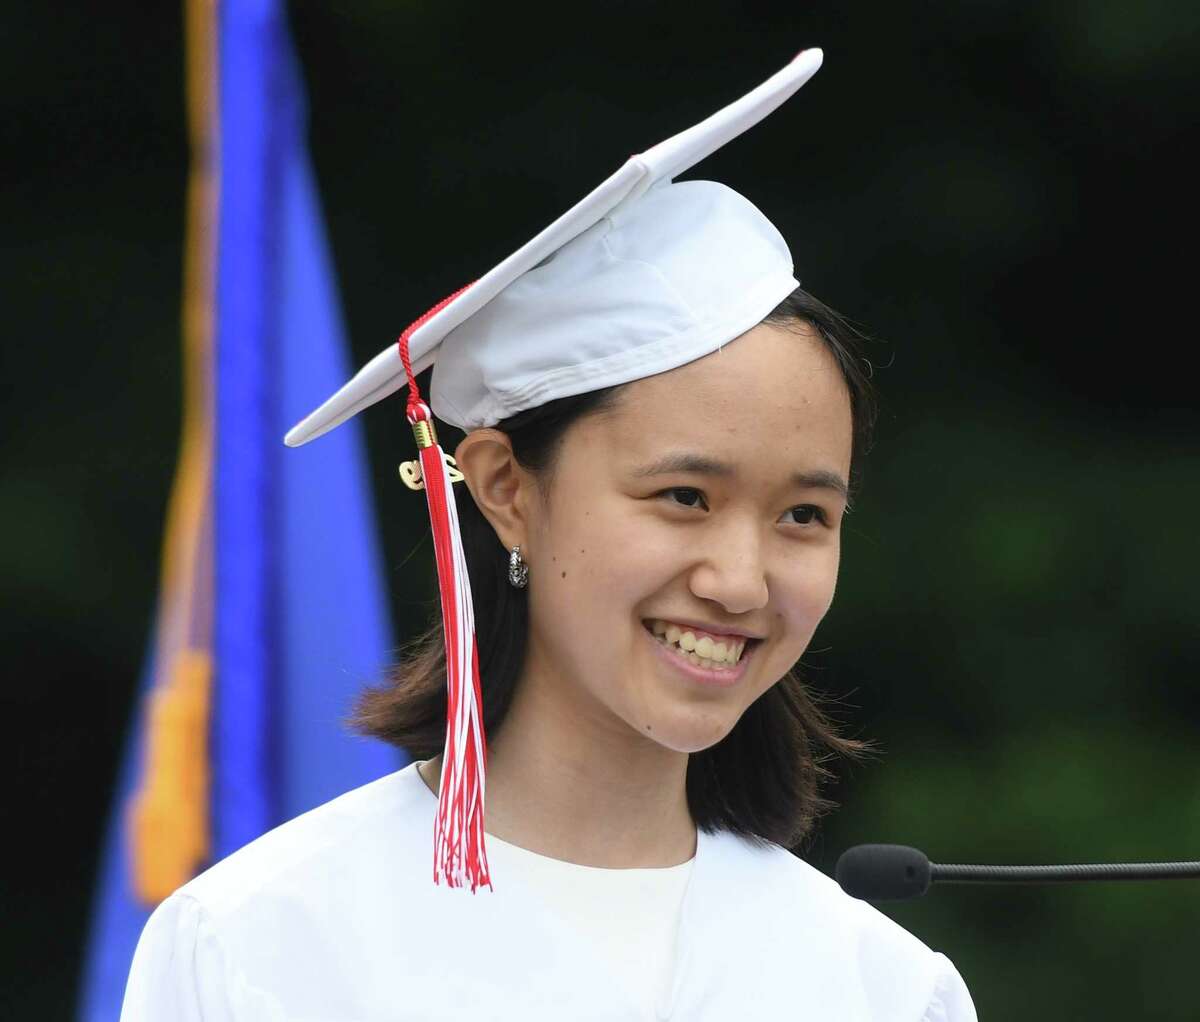 Co-Valedictorian Jovita Li speaks at the 2019 Graduation at Greenwich's High School's Cardinal Stadium in Greenwich, Conn. Monday, June 17, 2019. Emmy-winning musician and composer Rob Mathes, GHS Class of 1981, delivered the commencement speech as 677 students received their diplomas.